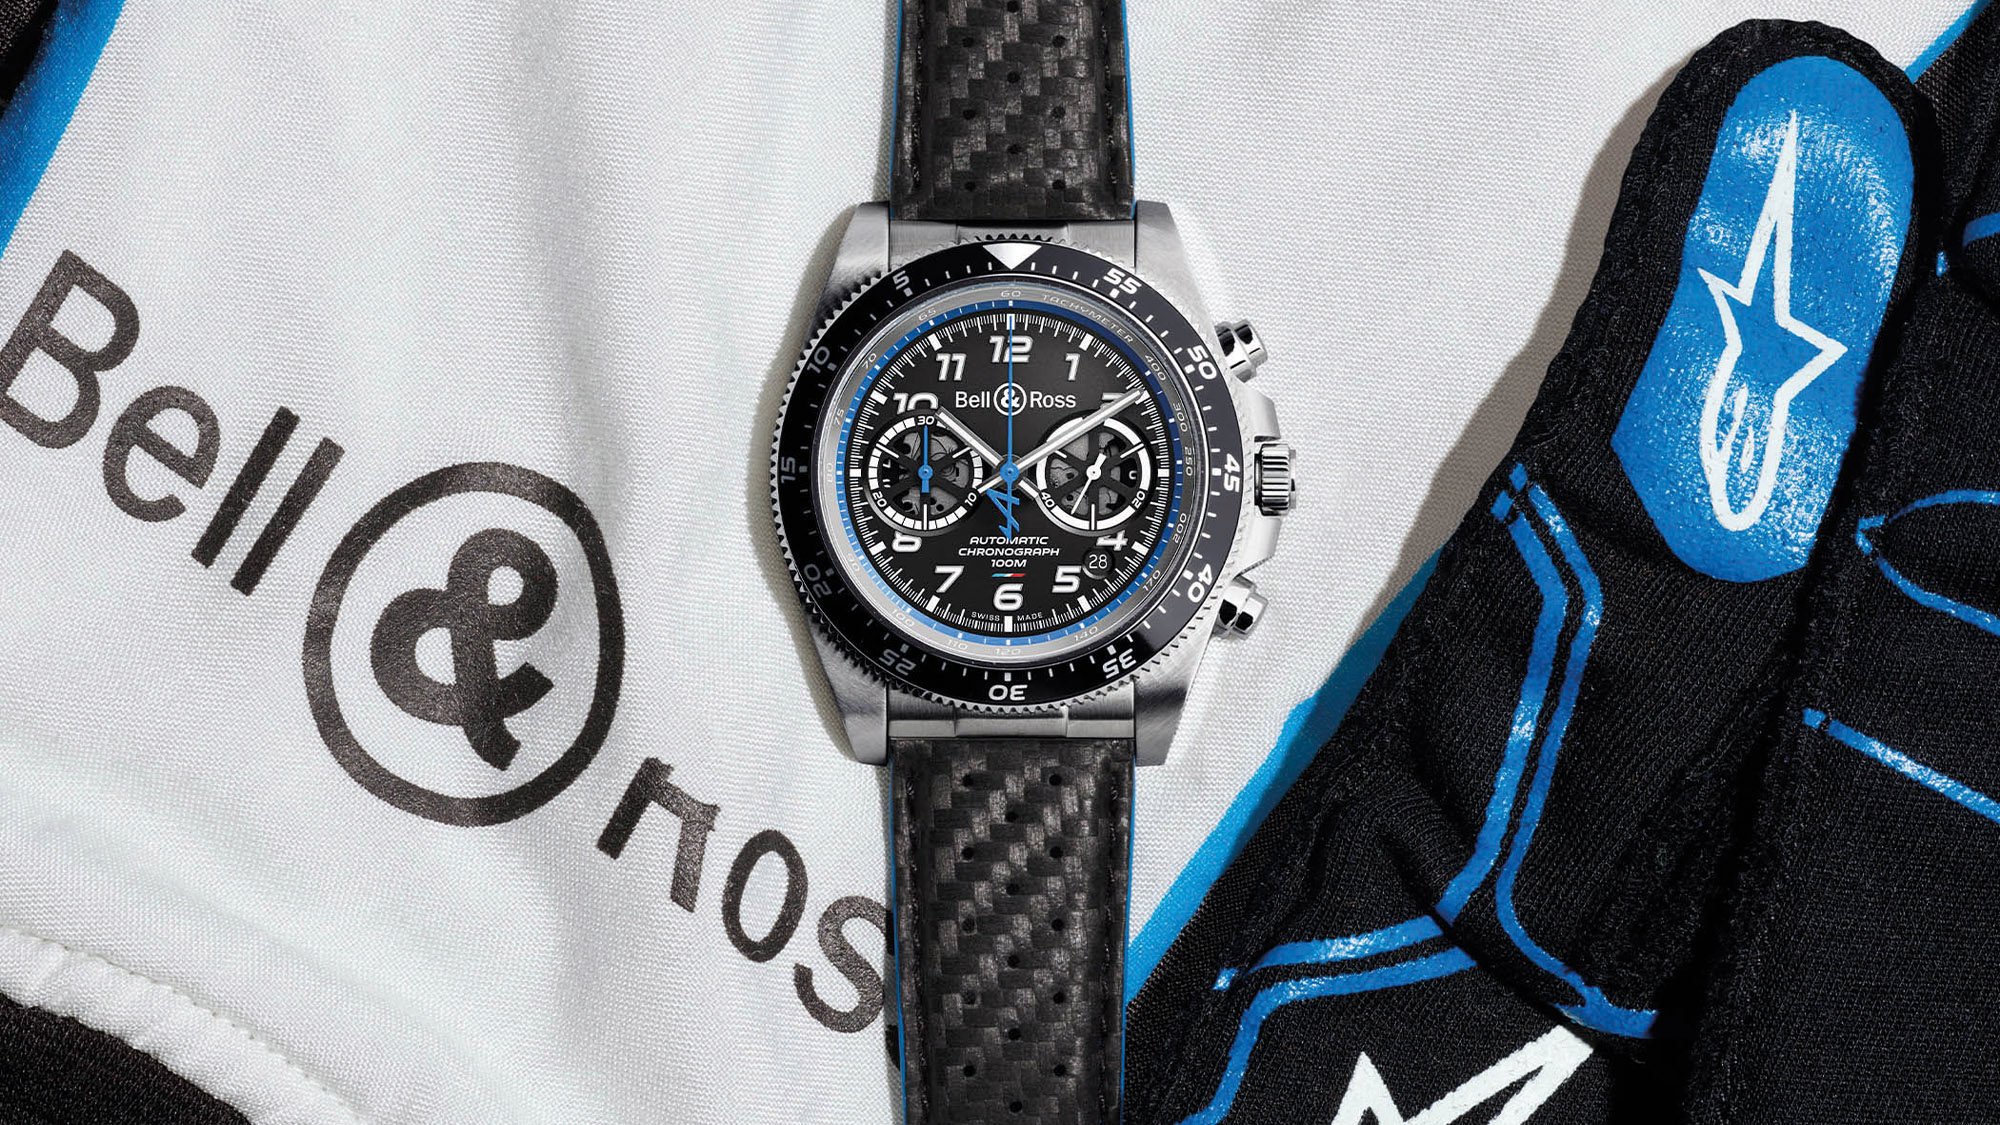 Bell and ross Alpine F1 editions watch